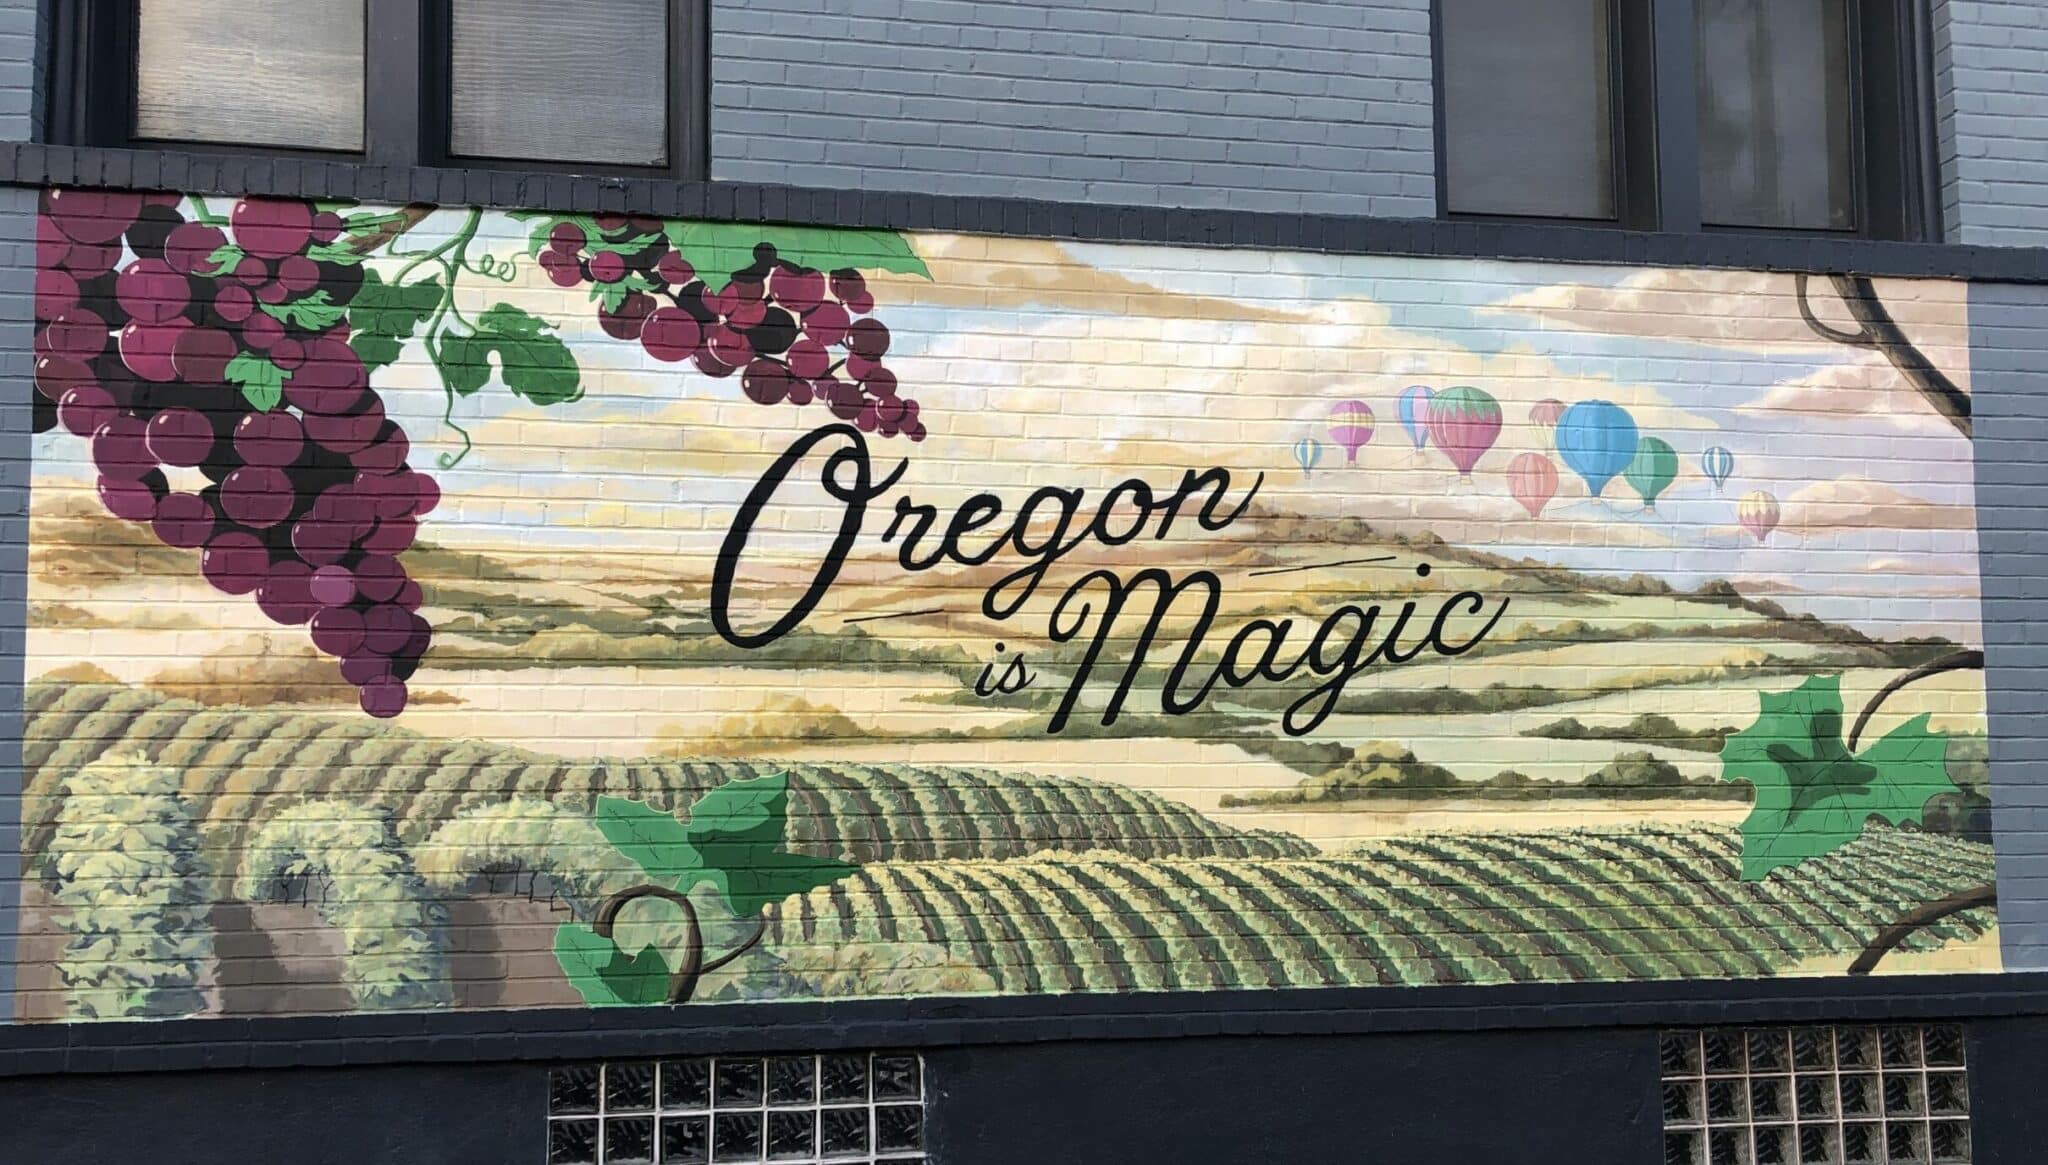 Oregon is Magic Mural in Forest Grove